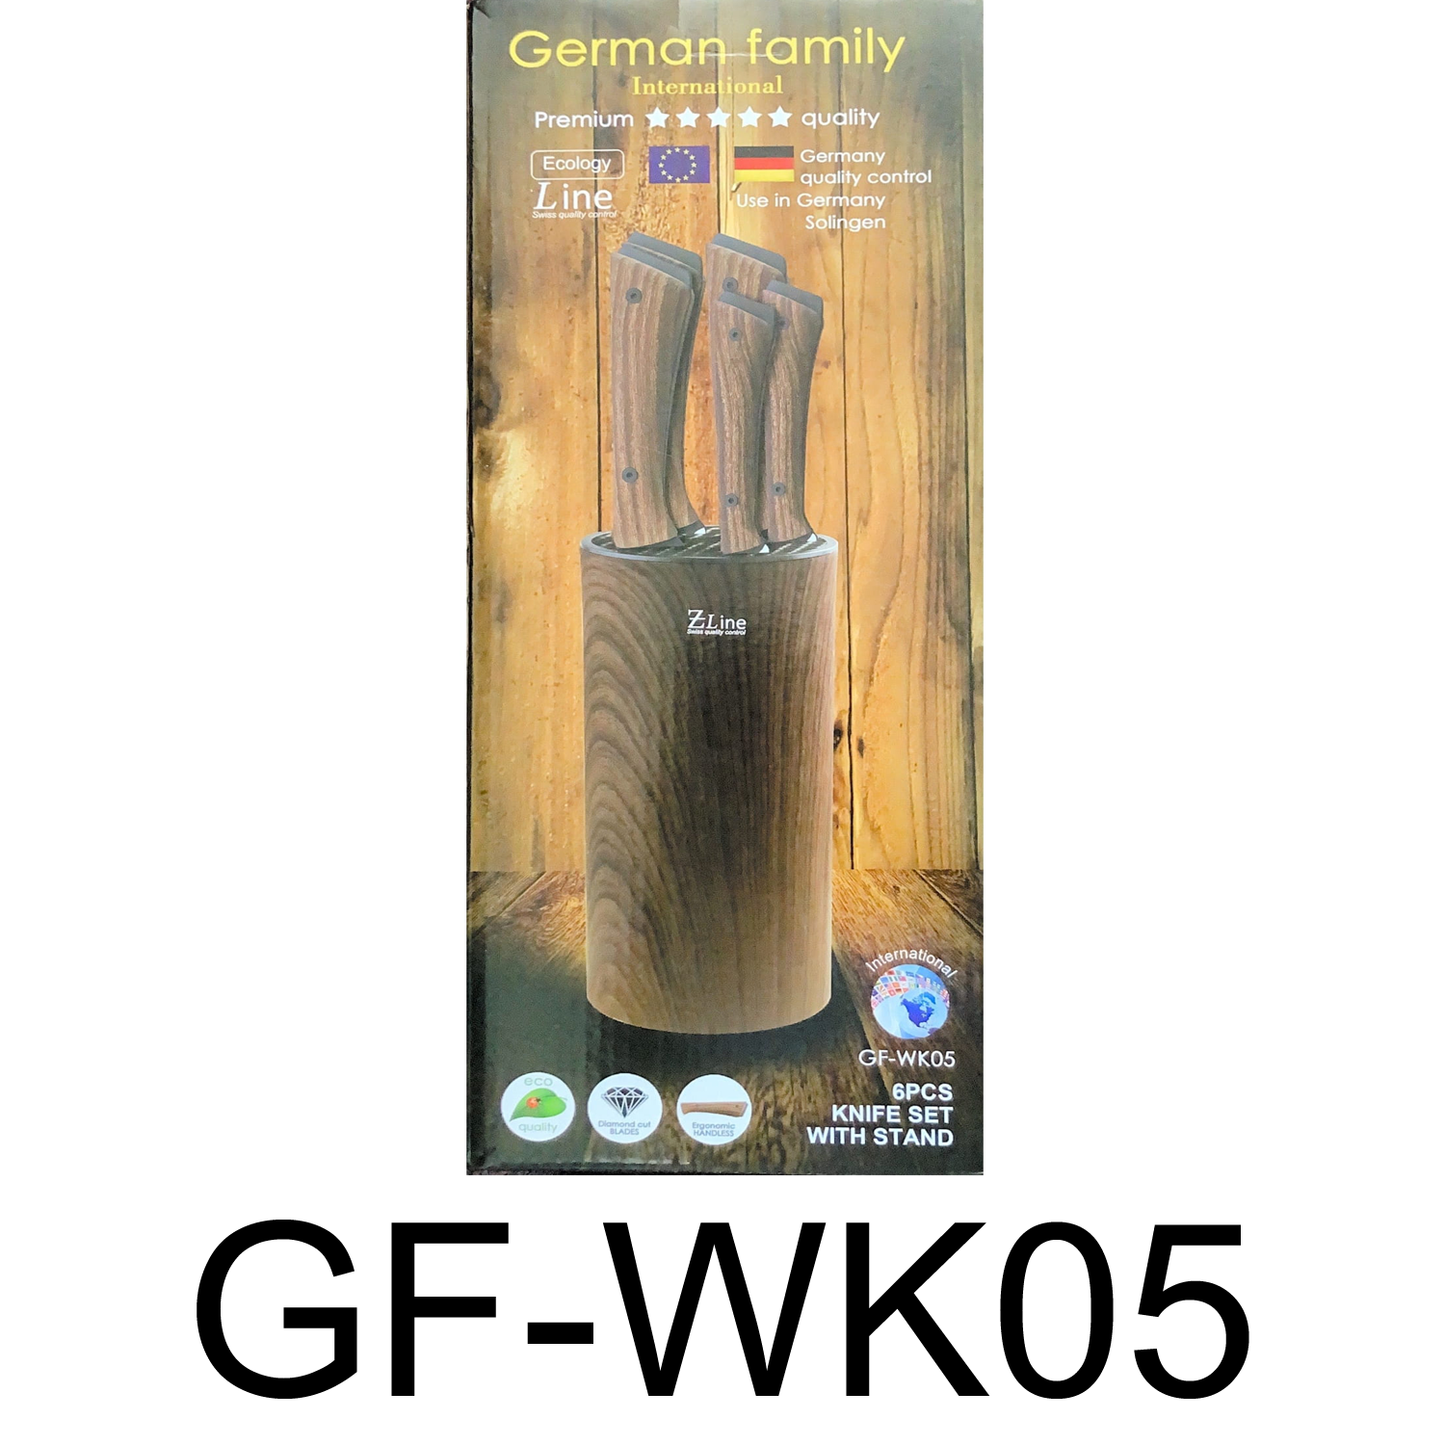 6 PC Knife Set with Stand